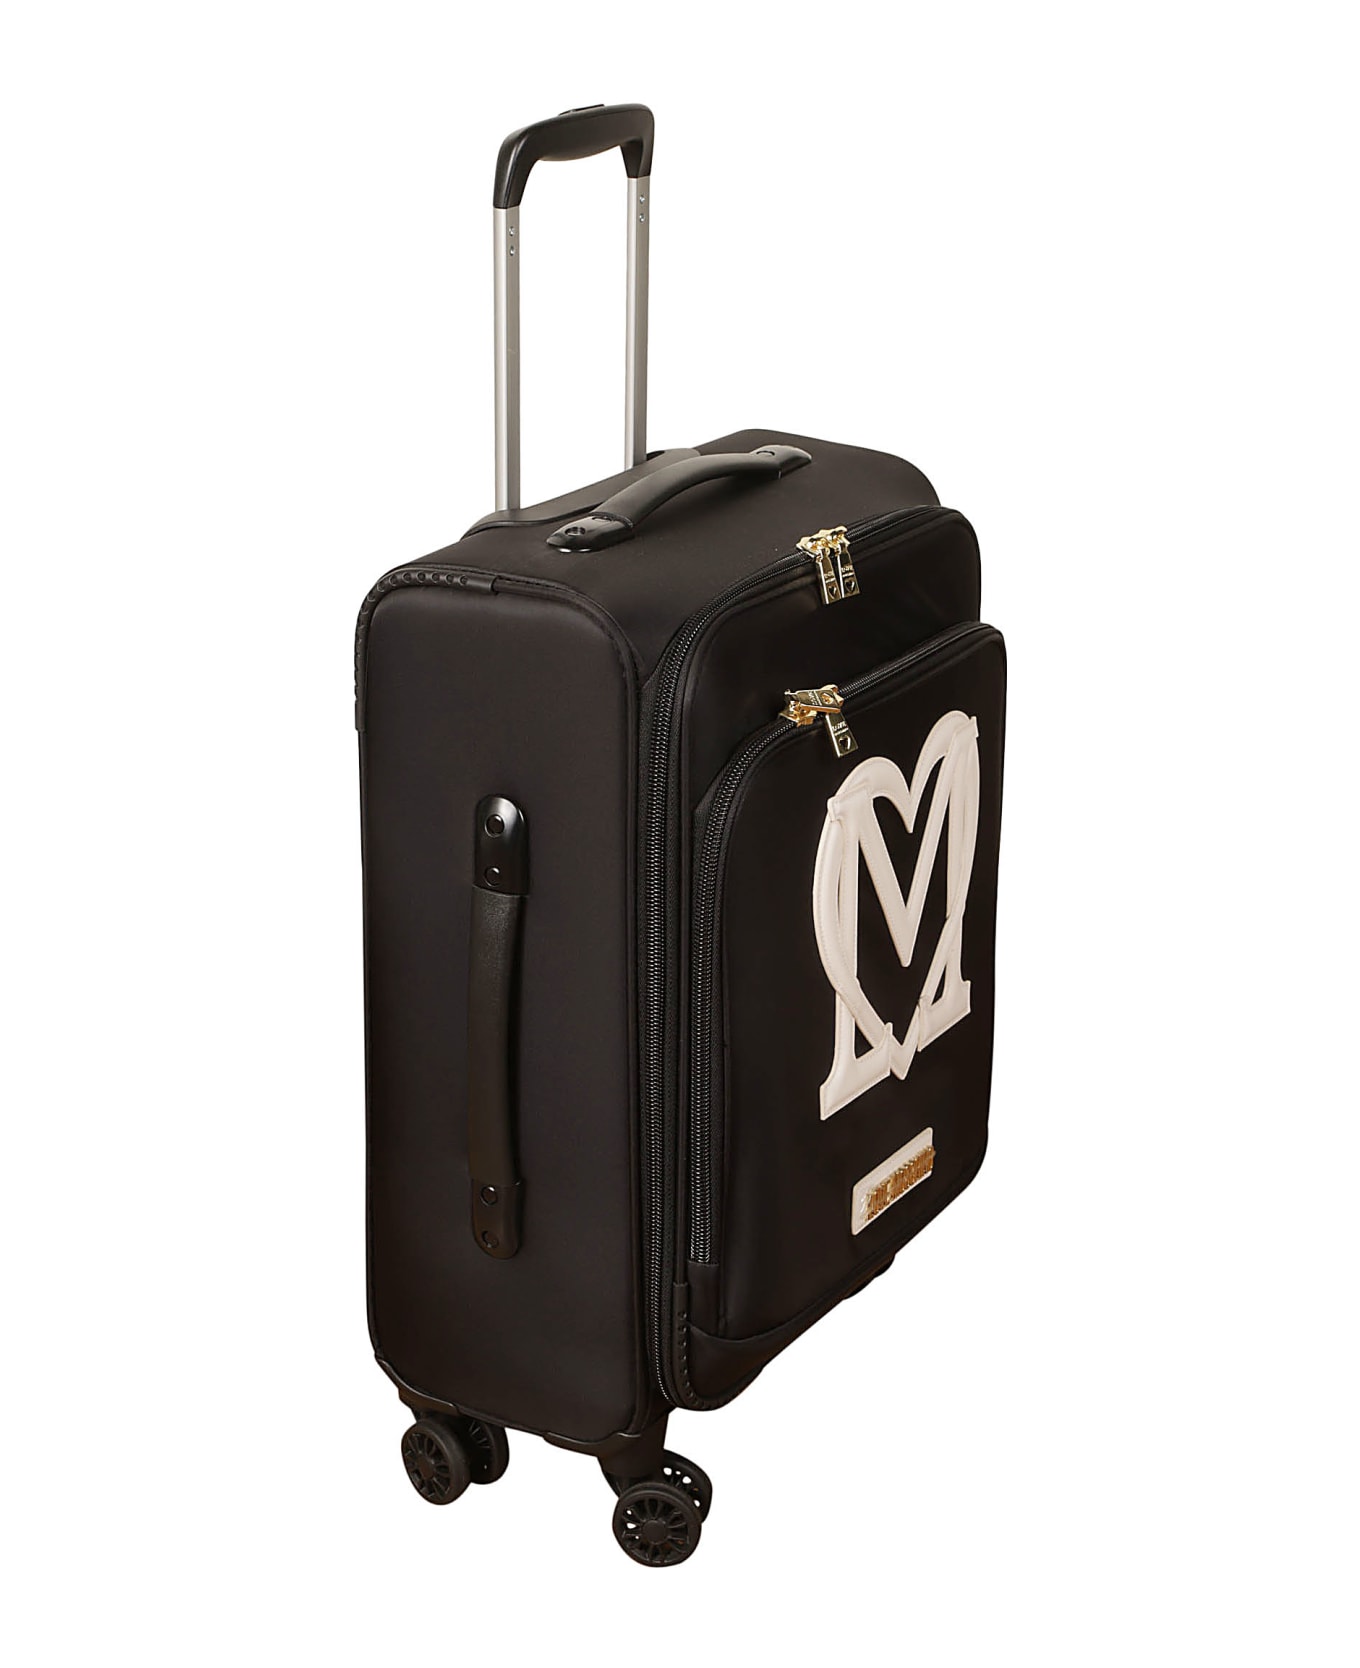 Love Moschino Heart Patched Two-way Zipped Trolley Luggage - Black/White